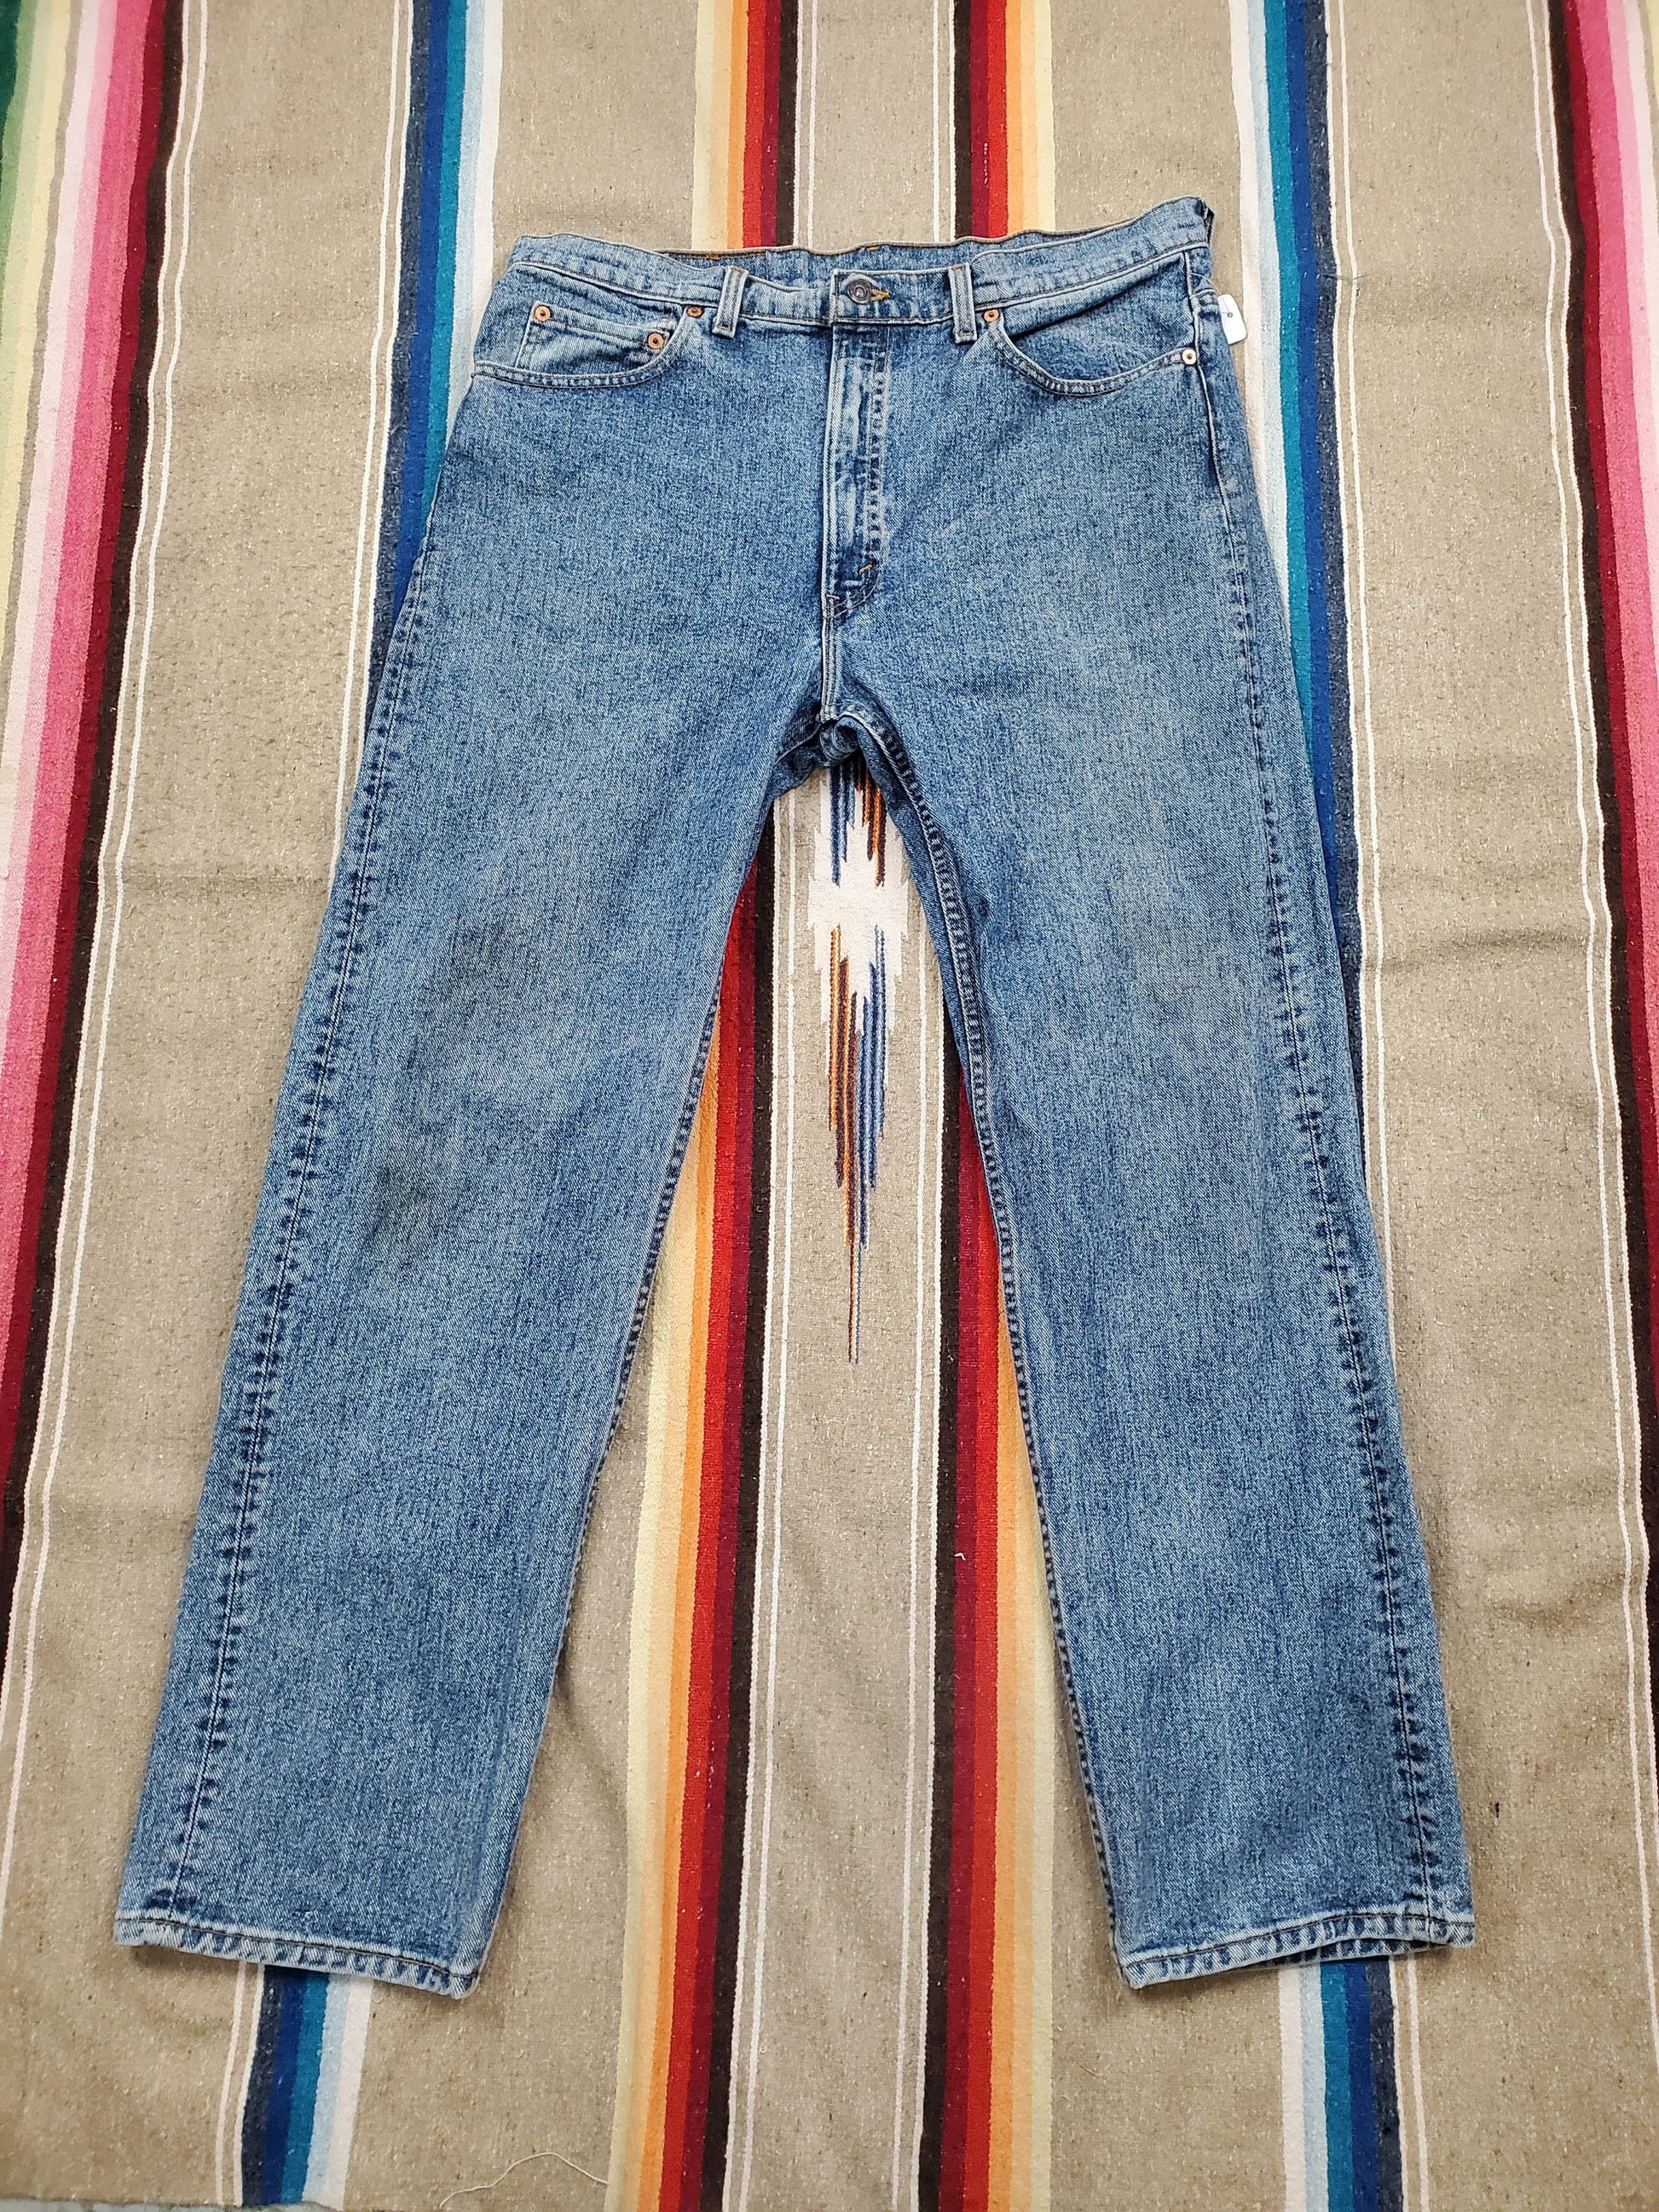 1990s Levi's 505 Blue Denim Jeans Made in USA Size 37x31